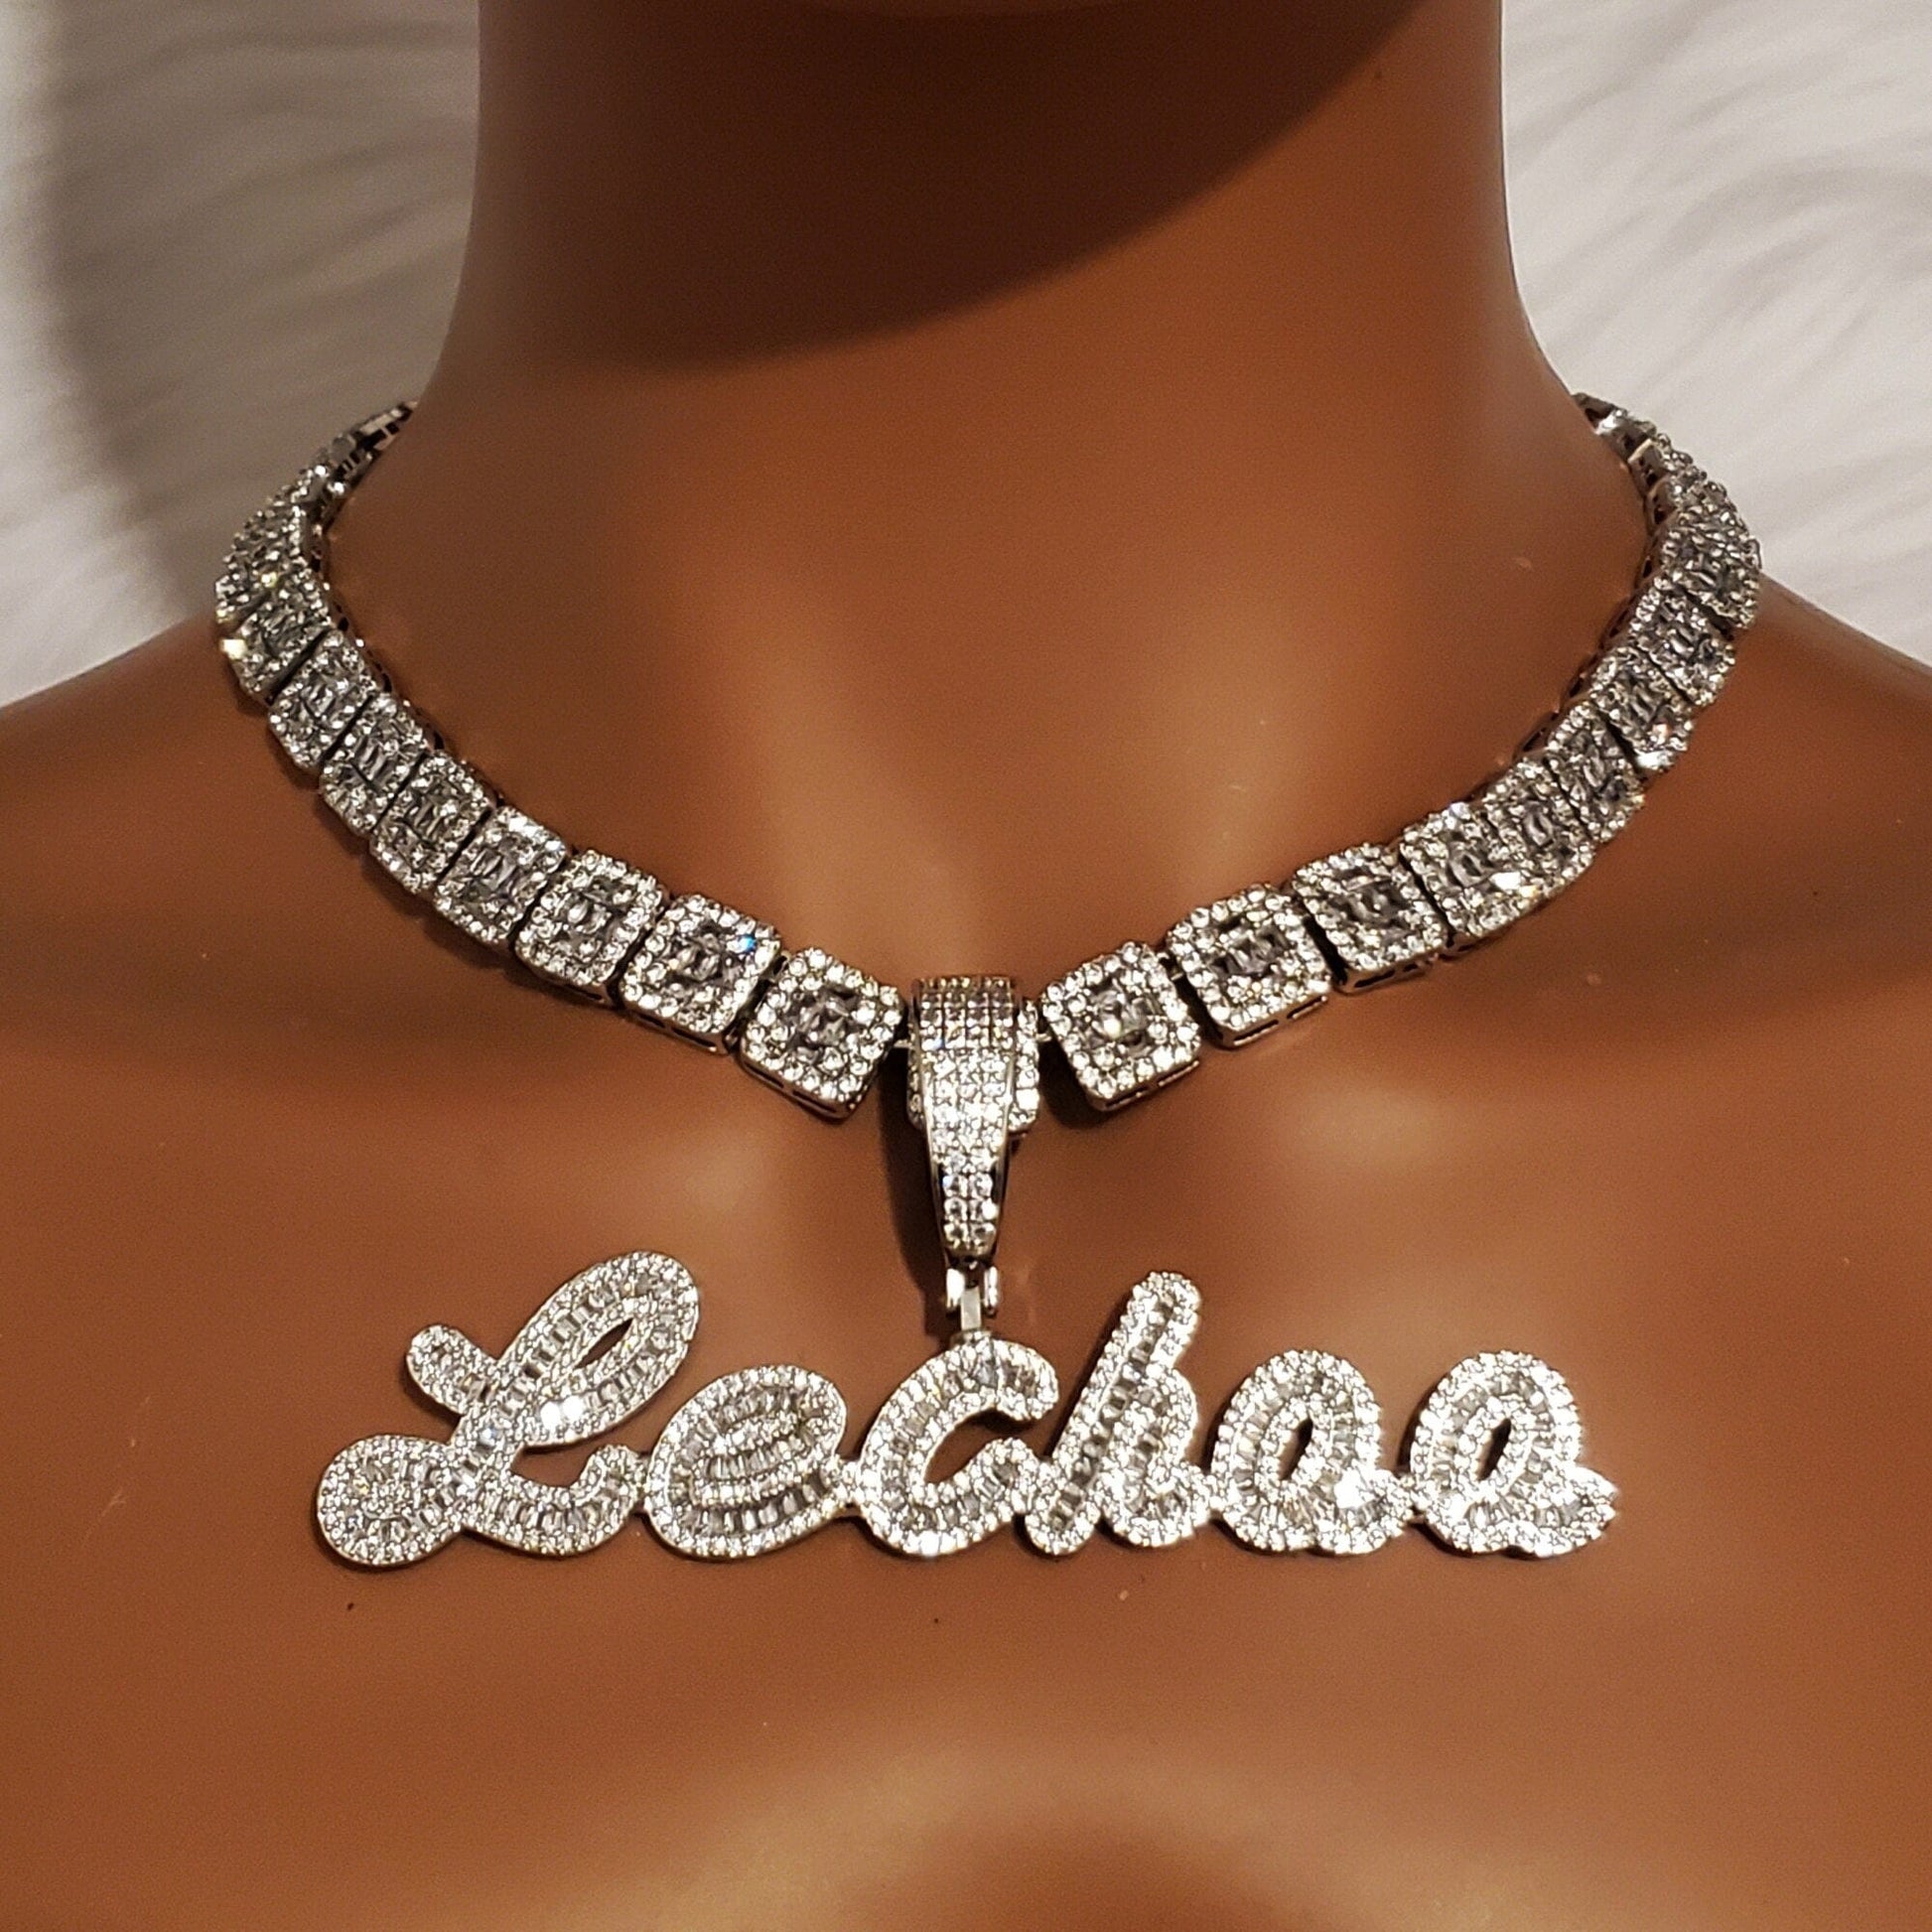 'Ohh, She Icy Icy' Custom Brush Cursive Micro Paved CZ Baguette Chain Necklaces by Orbelo | BlingxAddict